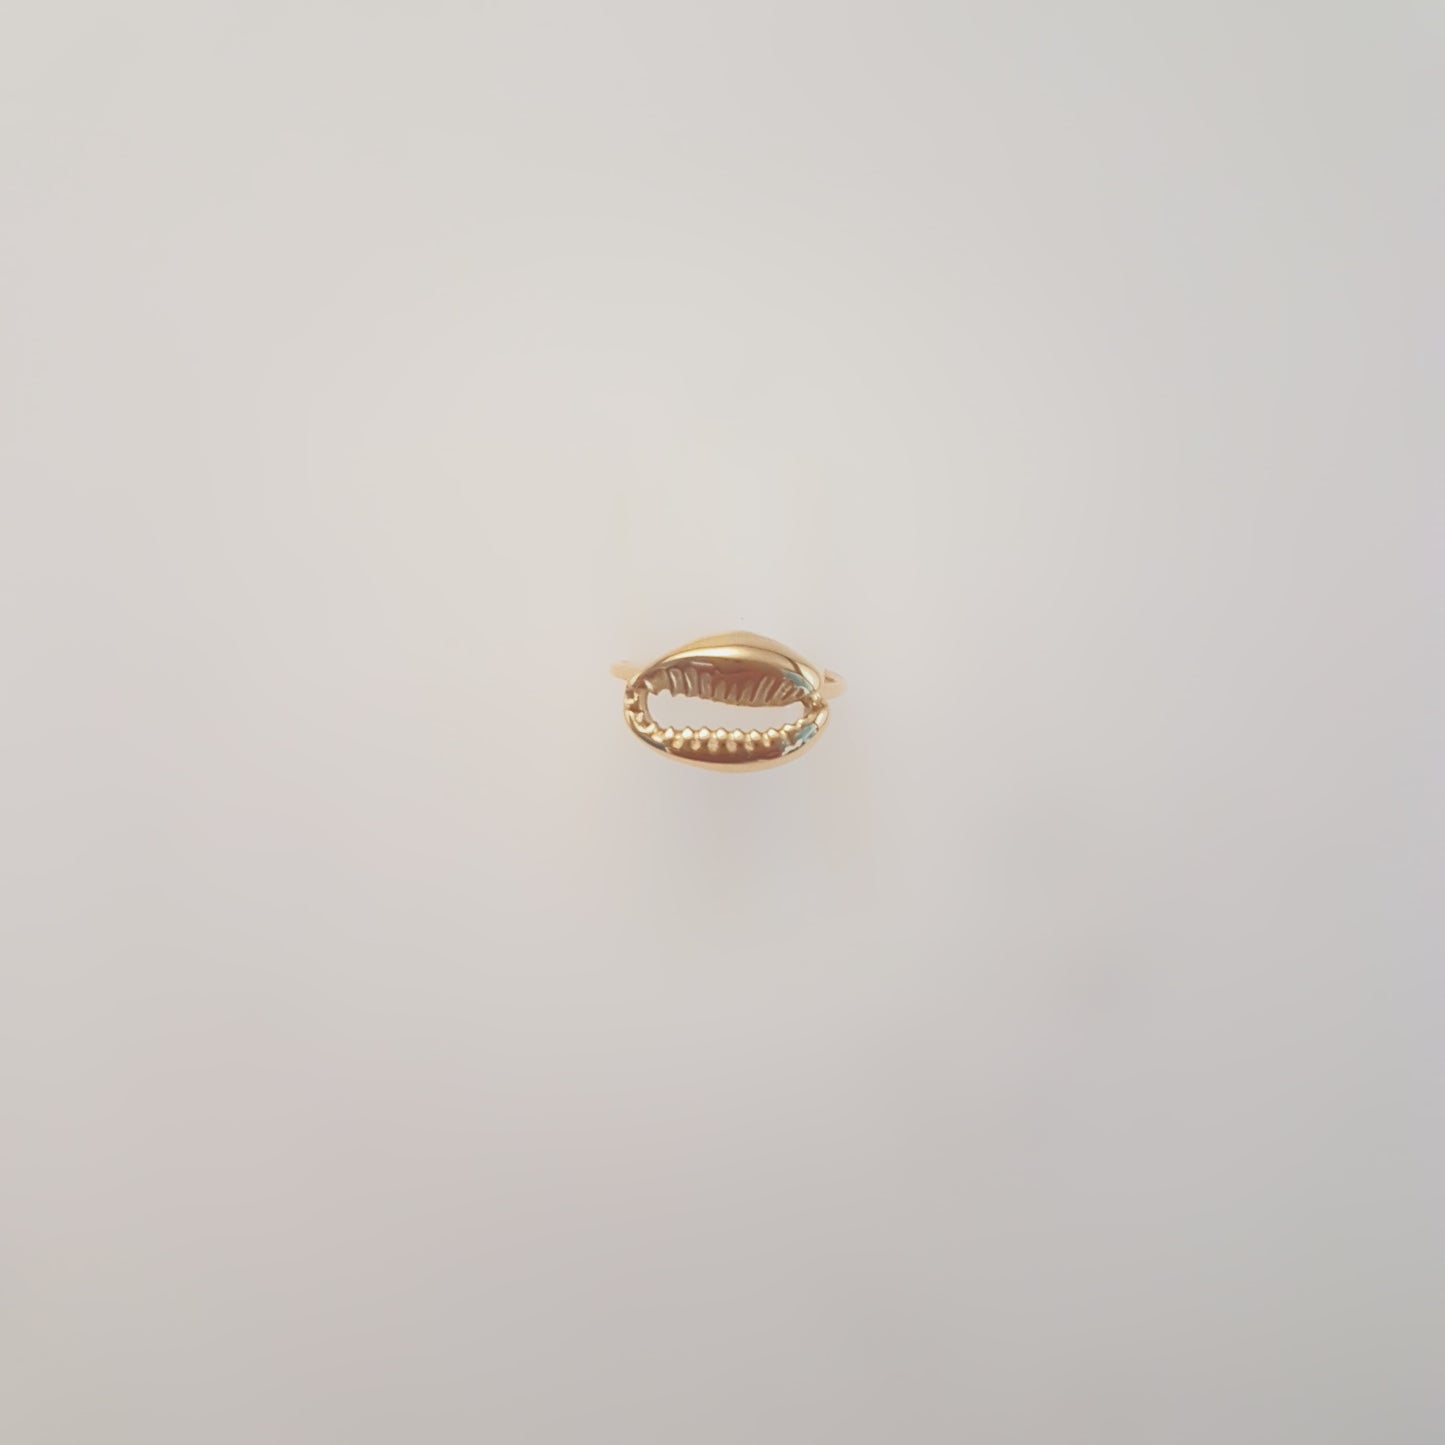 COWRIE SHELL RING